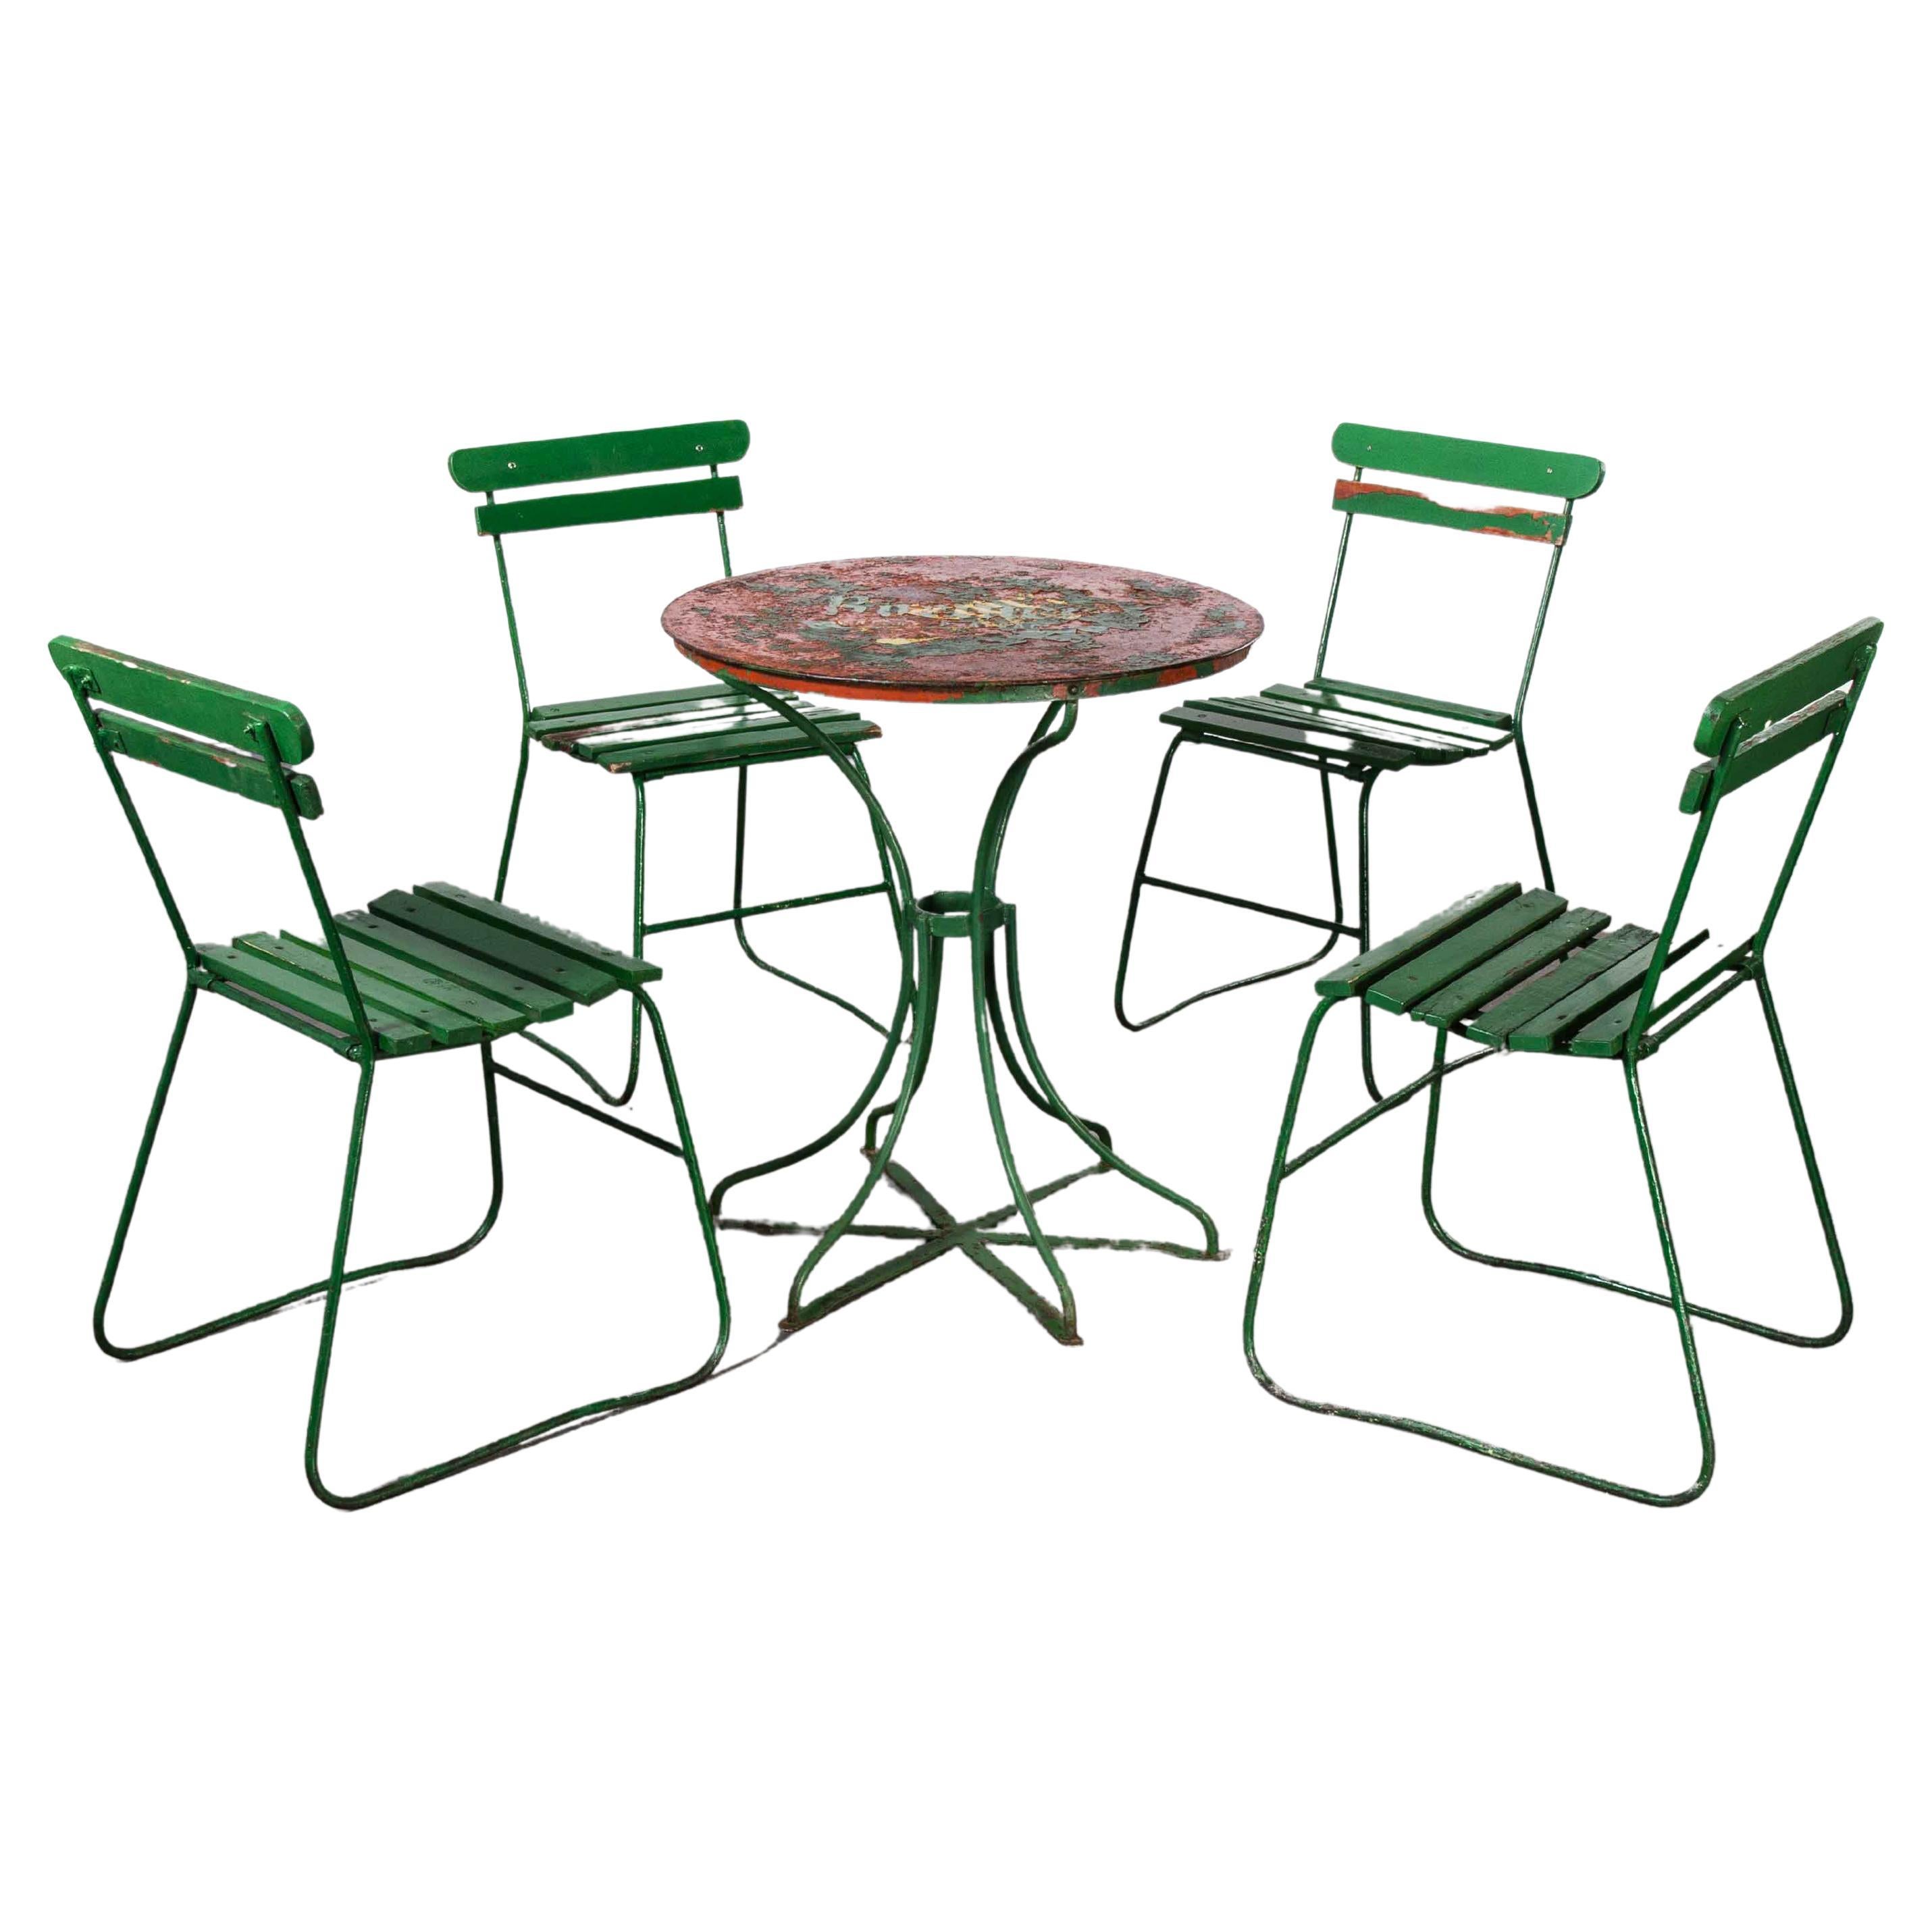 1940's Original French Green Garden Set, Table and Four Chairs